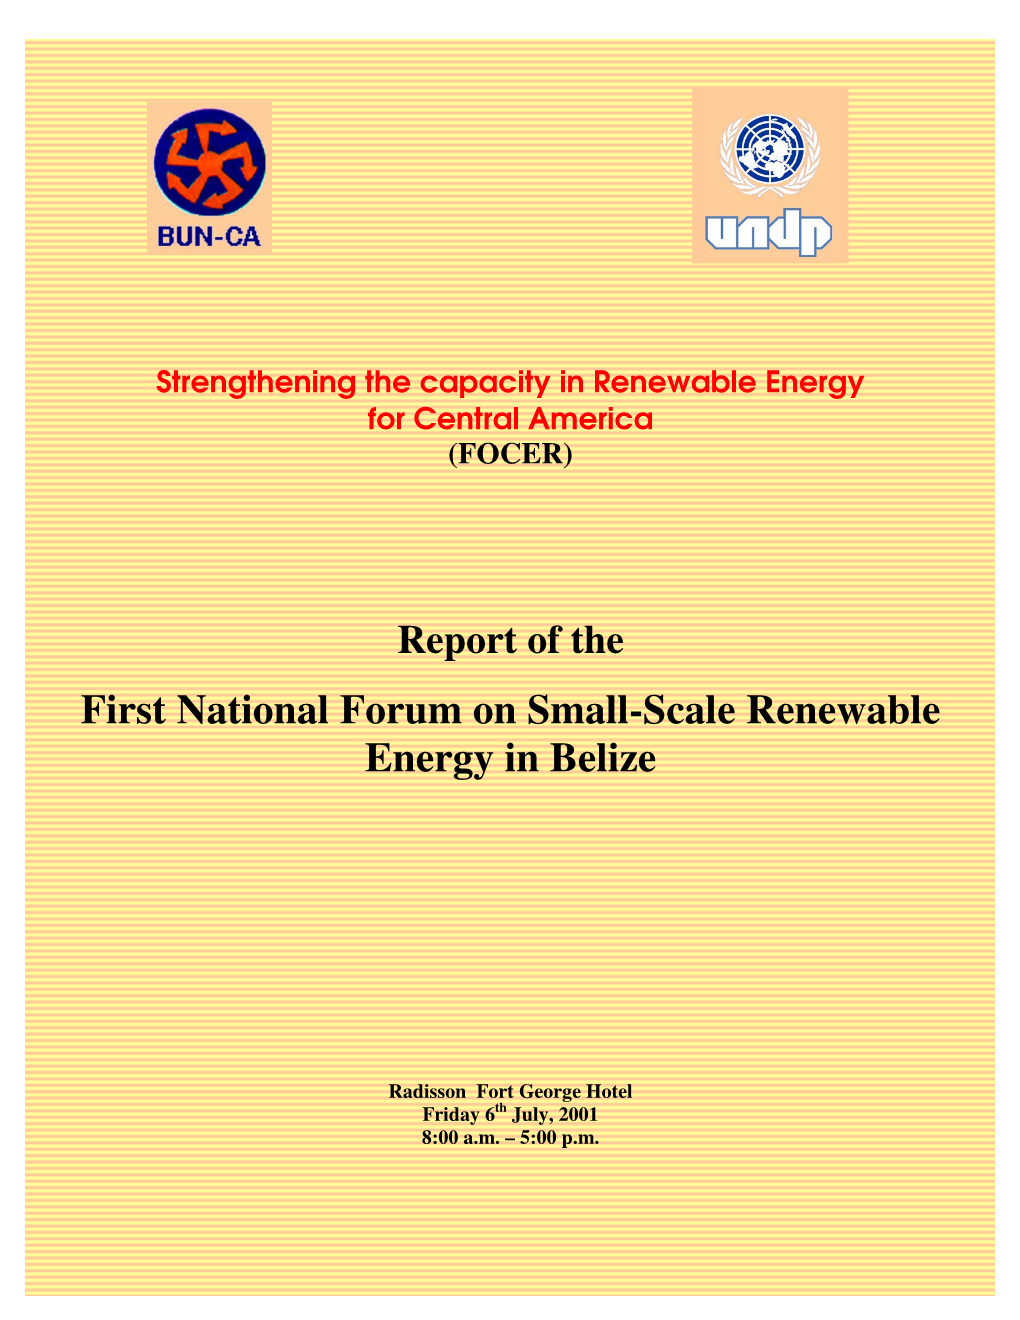 First National Forum on Small-Scale Renewable Energy in Belize